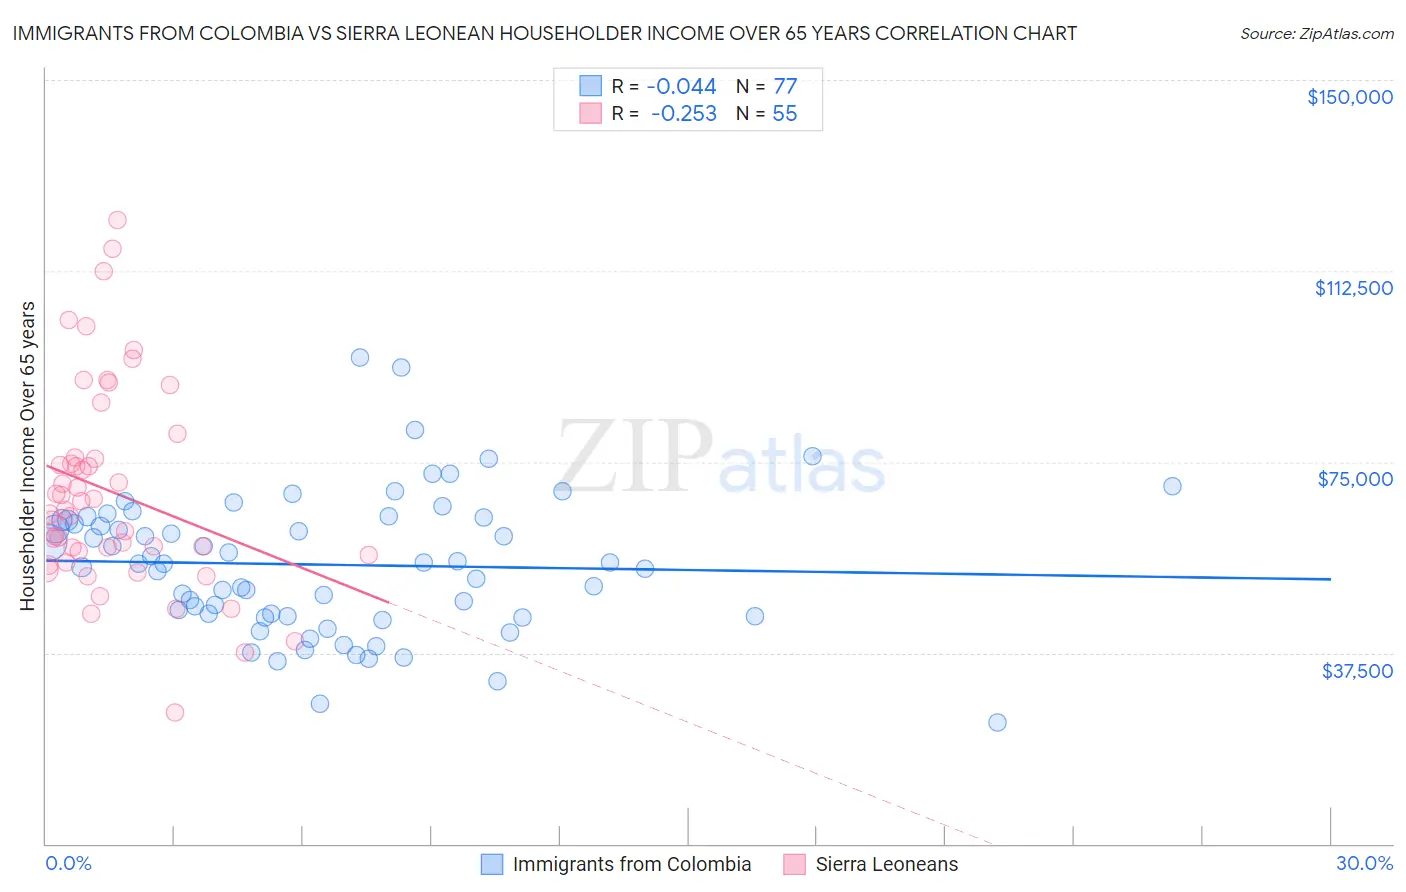 Immigrants from Colombia vs Sierra Leonean Householder Income Over 65 years